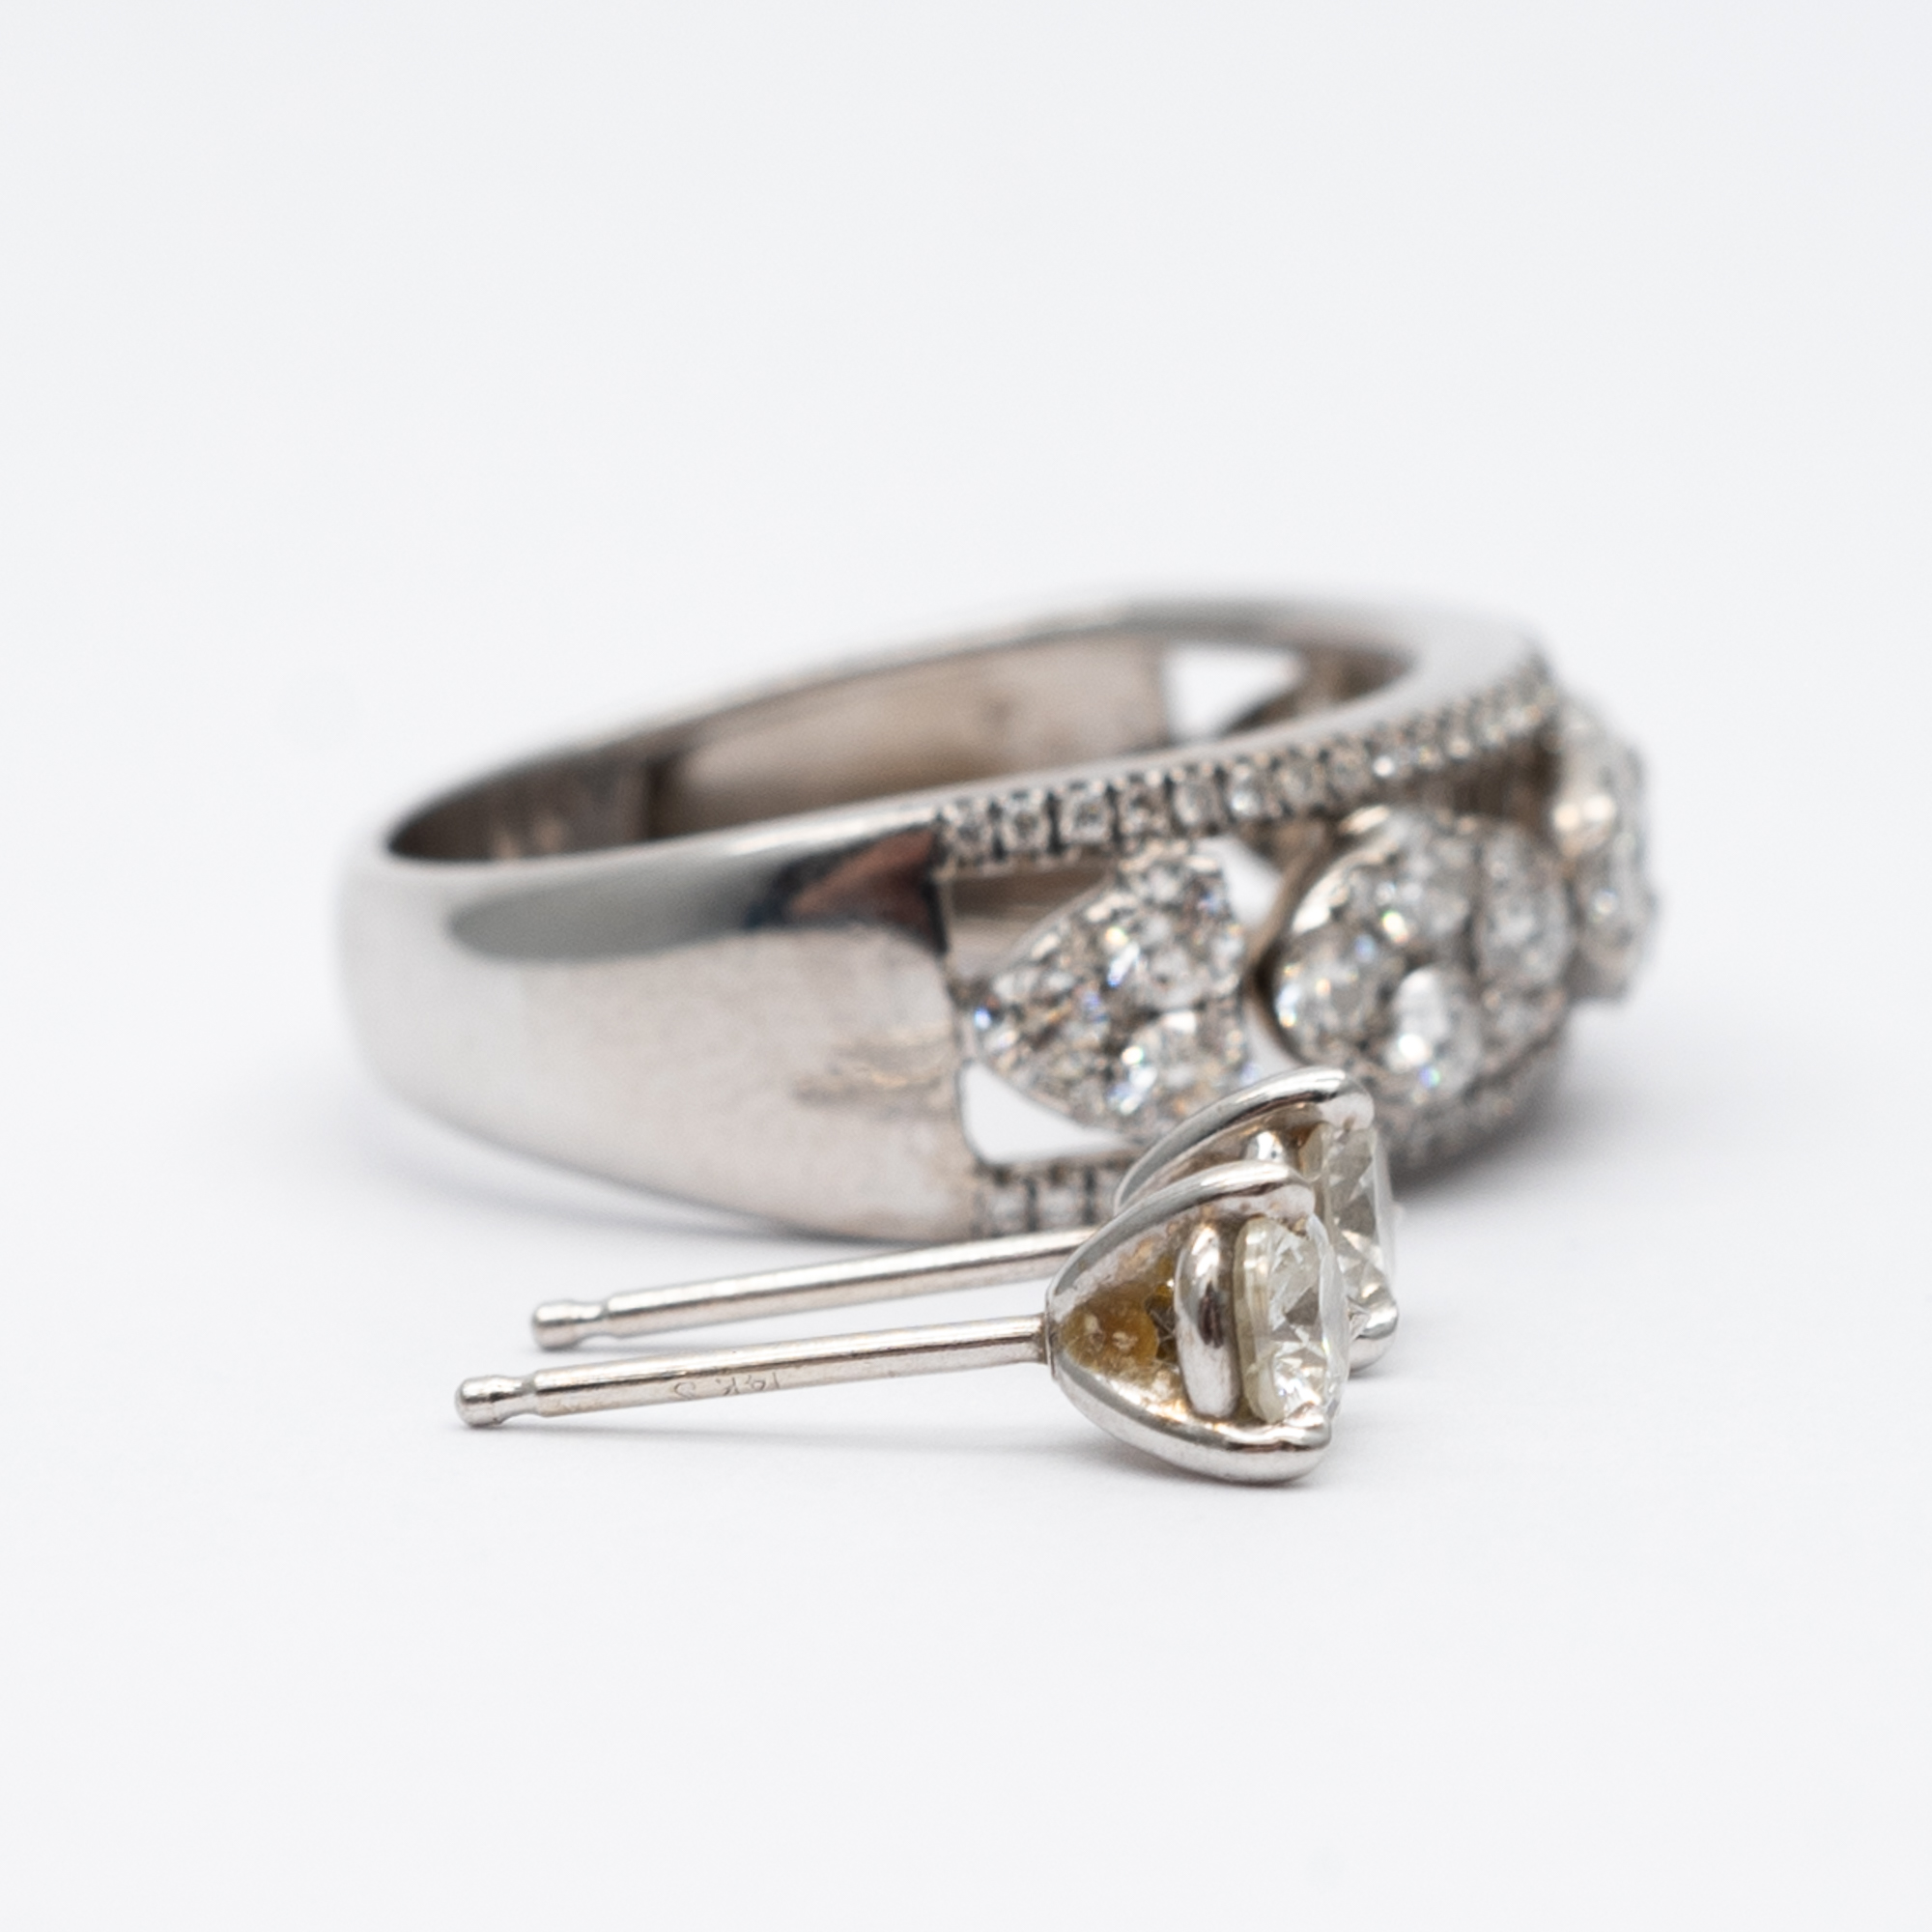 An 18ct white gold diamond dress ring and diamond stud earrings - Image 2 of 7